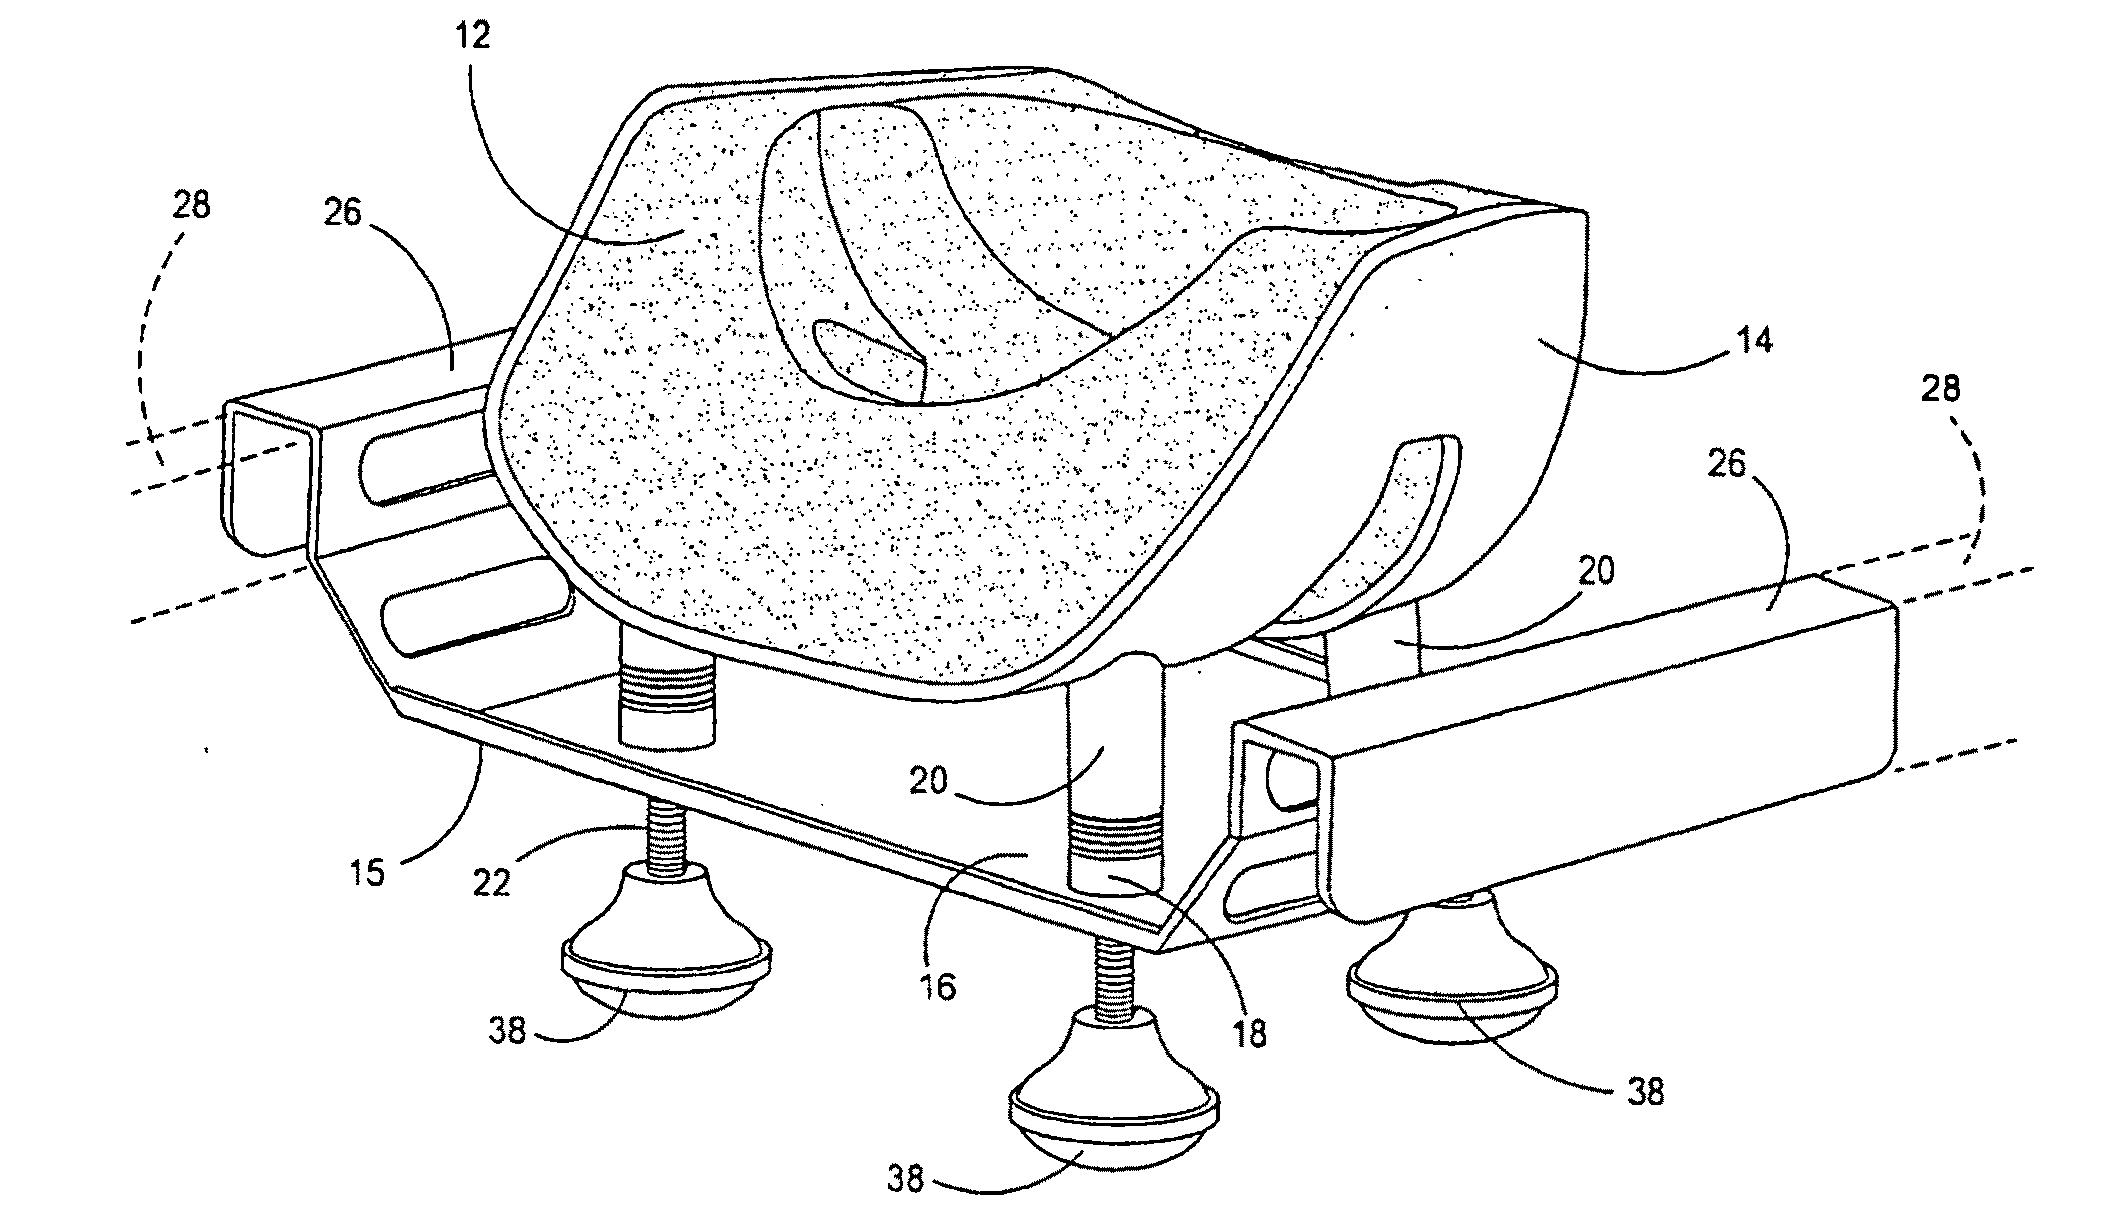 Table engageable support for head cushion supporting anesthetized patient